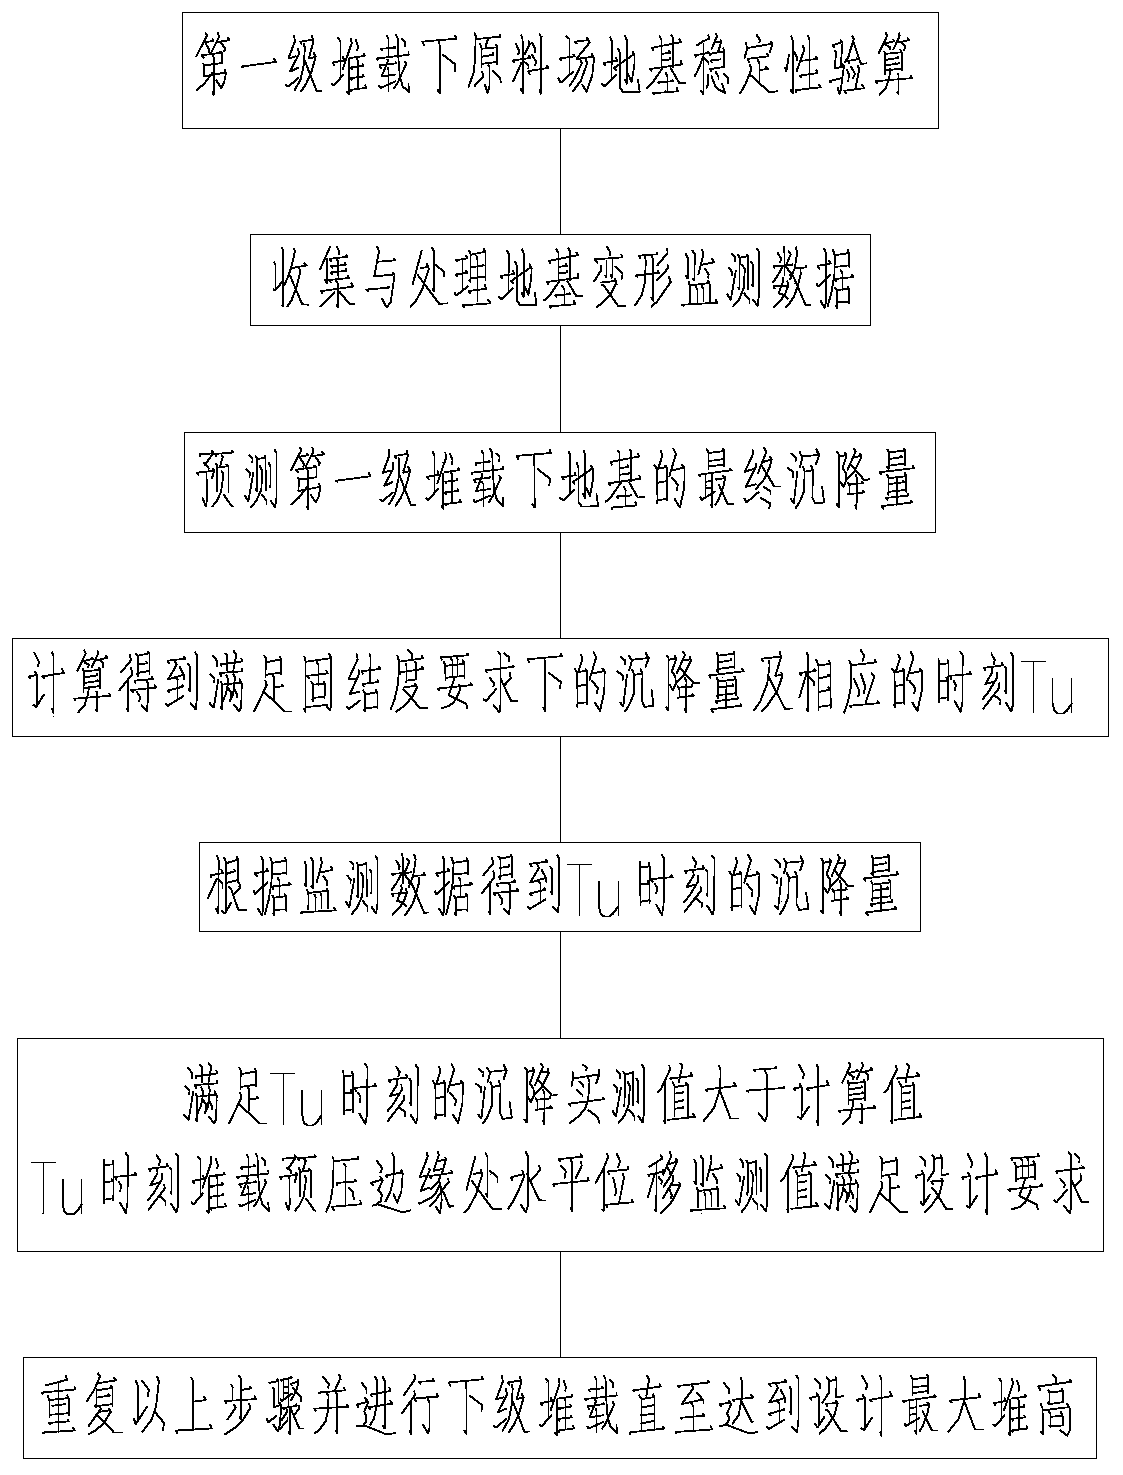 Large-area deep soft foundation graded filling construction stability control method